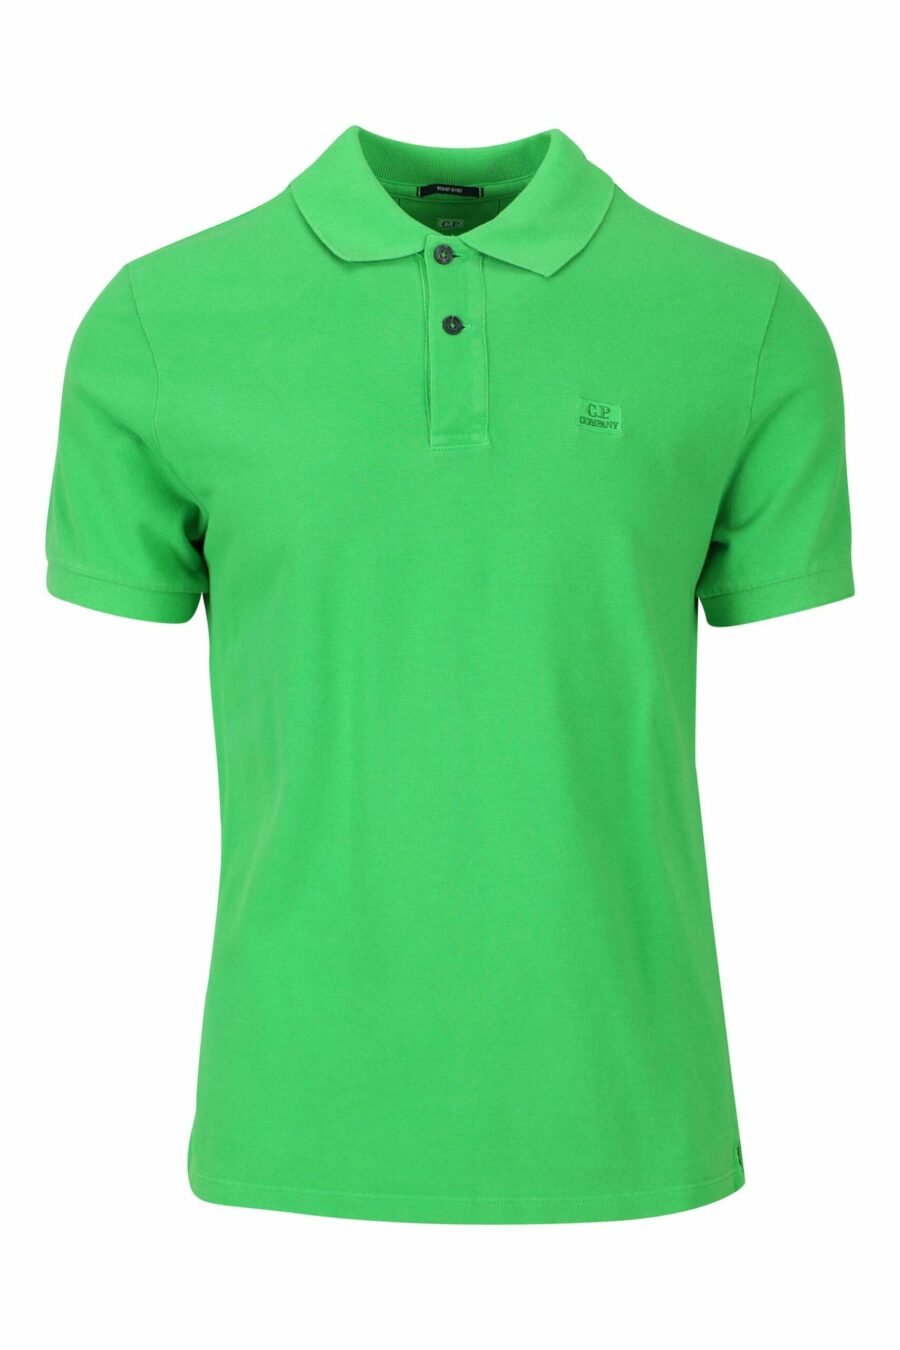 Green polo shirt with mini logo patch - 7620943642308 1 scaled